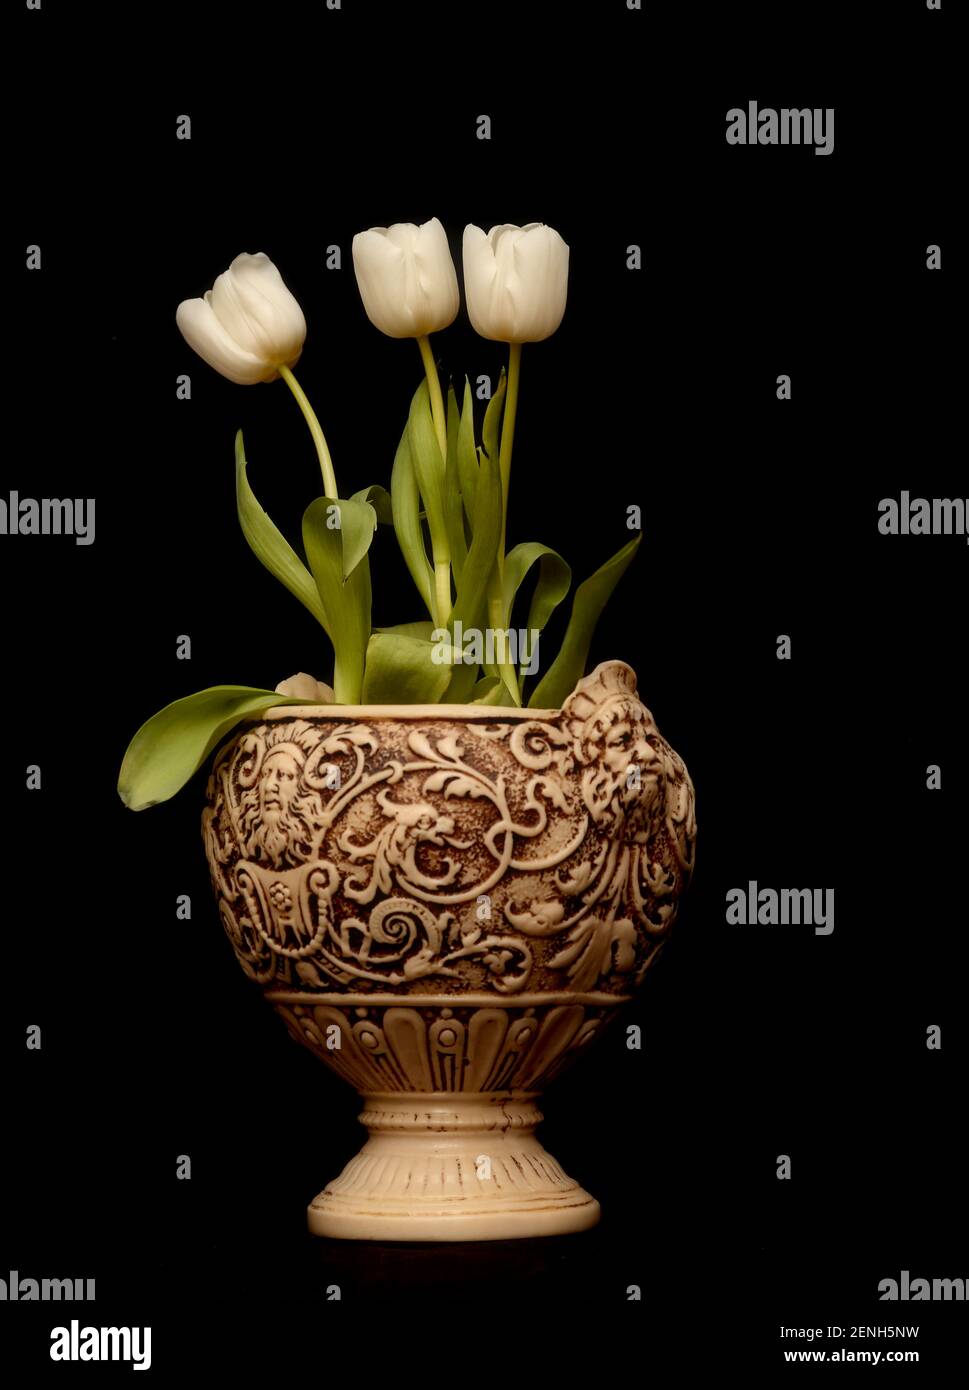 Tulips in an old figured vase with black background Stock Photo